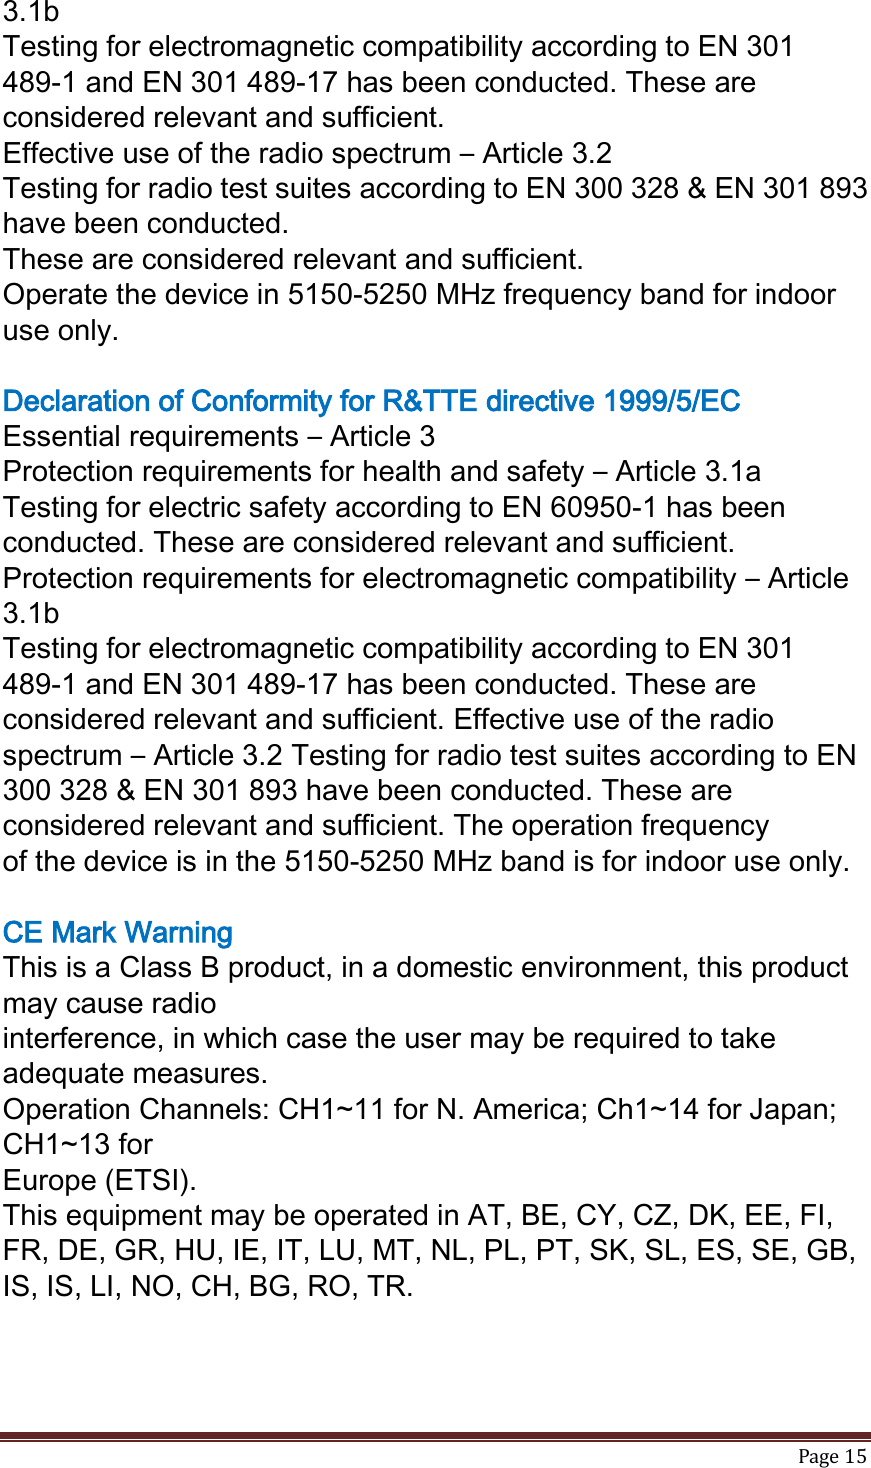   Page 15  3.1b Testing for electromagnetic compatibility according to EN 301 489-1 and EN 301 489-17 has been conducted. These are considered relevant and sufficient. Effective use of the radio spectrum – Article 3.2 Testing for radio test suites according to EN 300 328 &amp; EN 301 893 have been conducted. These are considered relevant and sufficient. Operate the device in 5150-5250 MHz frequency band for indoor use only.  Declaration of Conformity for R&amp;TTE directive 1999/5/EC Essential requirements – Article 3 Protection requirements for health and safety – Article 3.1a Testing for electric safety according to EN 60950-1 has been conducted. These are considered relevant and sufficient. Protection requirements for electromagnetic compatibility – Article 3.1b Testing for electromagnetic compatibility according to EN 301 489-1 and EN 301 489-17 has been conducted. These are considered relevant and sufficient. Effective use of the radio spectrum – Article 3.2 Testing for radio test suites according to EN 300 328 &amp; EN 301 893 have been conducted. These are considered relevant and sufficient. The operation frequency of the device is in the 5150-5250 MHz band is for indoor use only.  CE Mark Warning This is a Class B product, in a domestic environment, this product may cause radio interference, in which case the user may be required to take adequate measures. Operation Channels: CH1~11 for N. America; Ch1~14 for Japan; CH1~13 for Europe (ETSI). This equipment may be operated in AT, BE, CY, CZ, DK, EE, FI, FR, DE, GR, HU, IE, IT, LU, MT, NL, PL, PT, SK, SL, ES, SE, GB, IS, IS, LI, NO, CH, BG, RO, TR. 